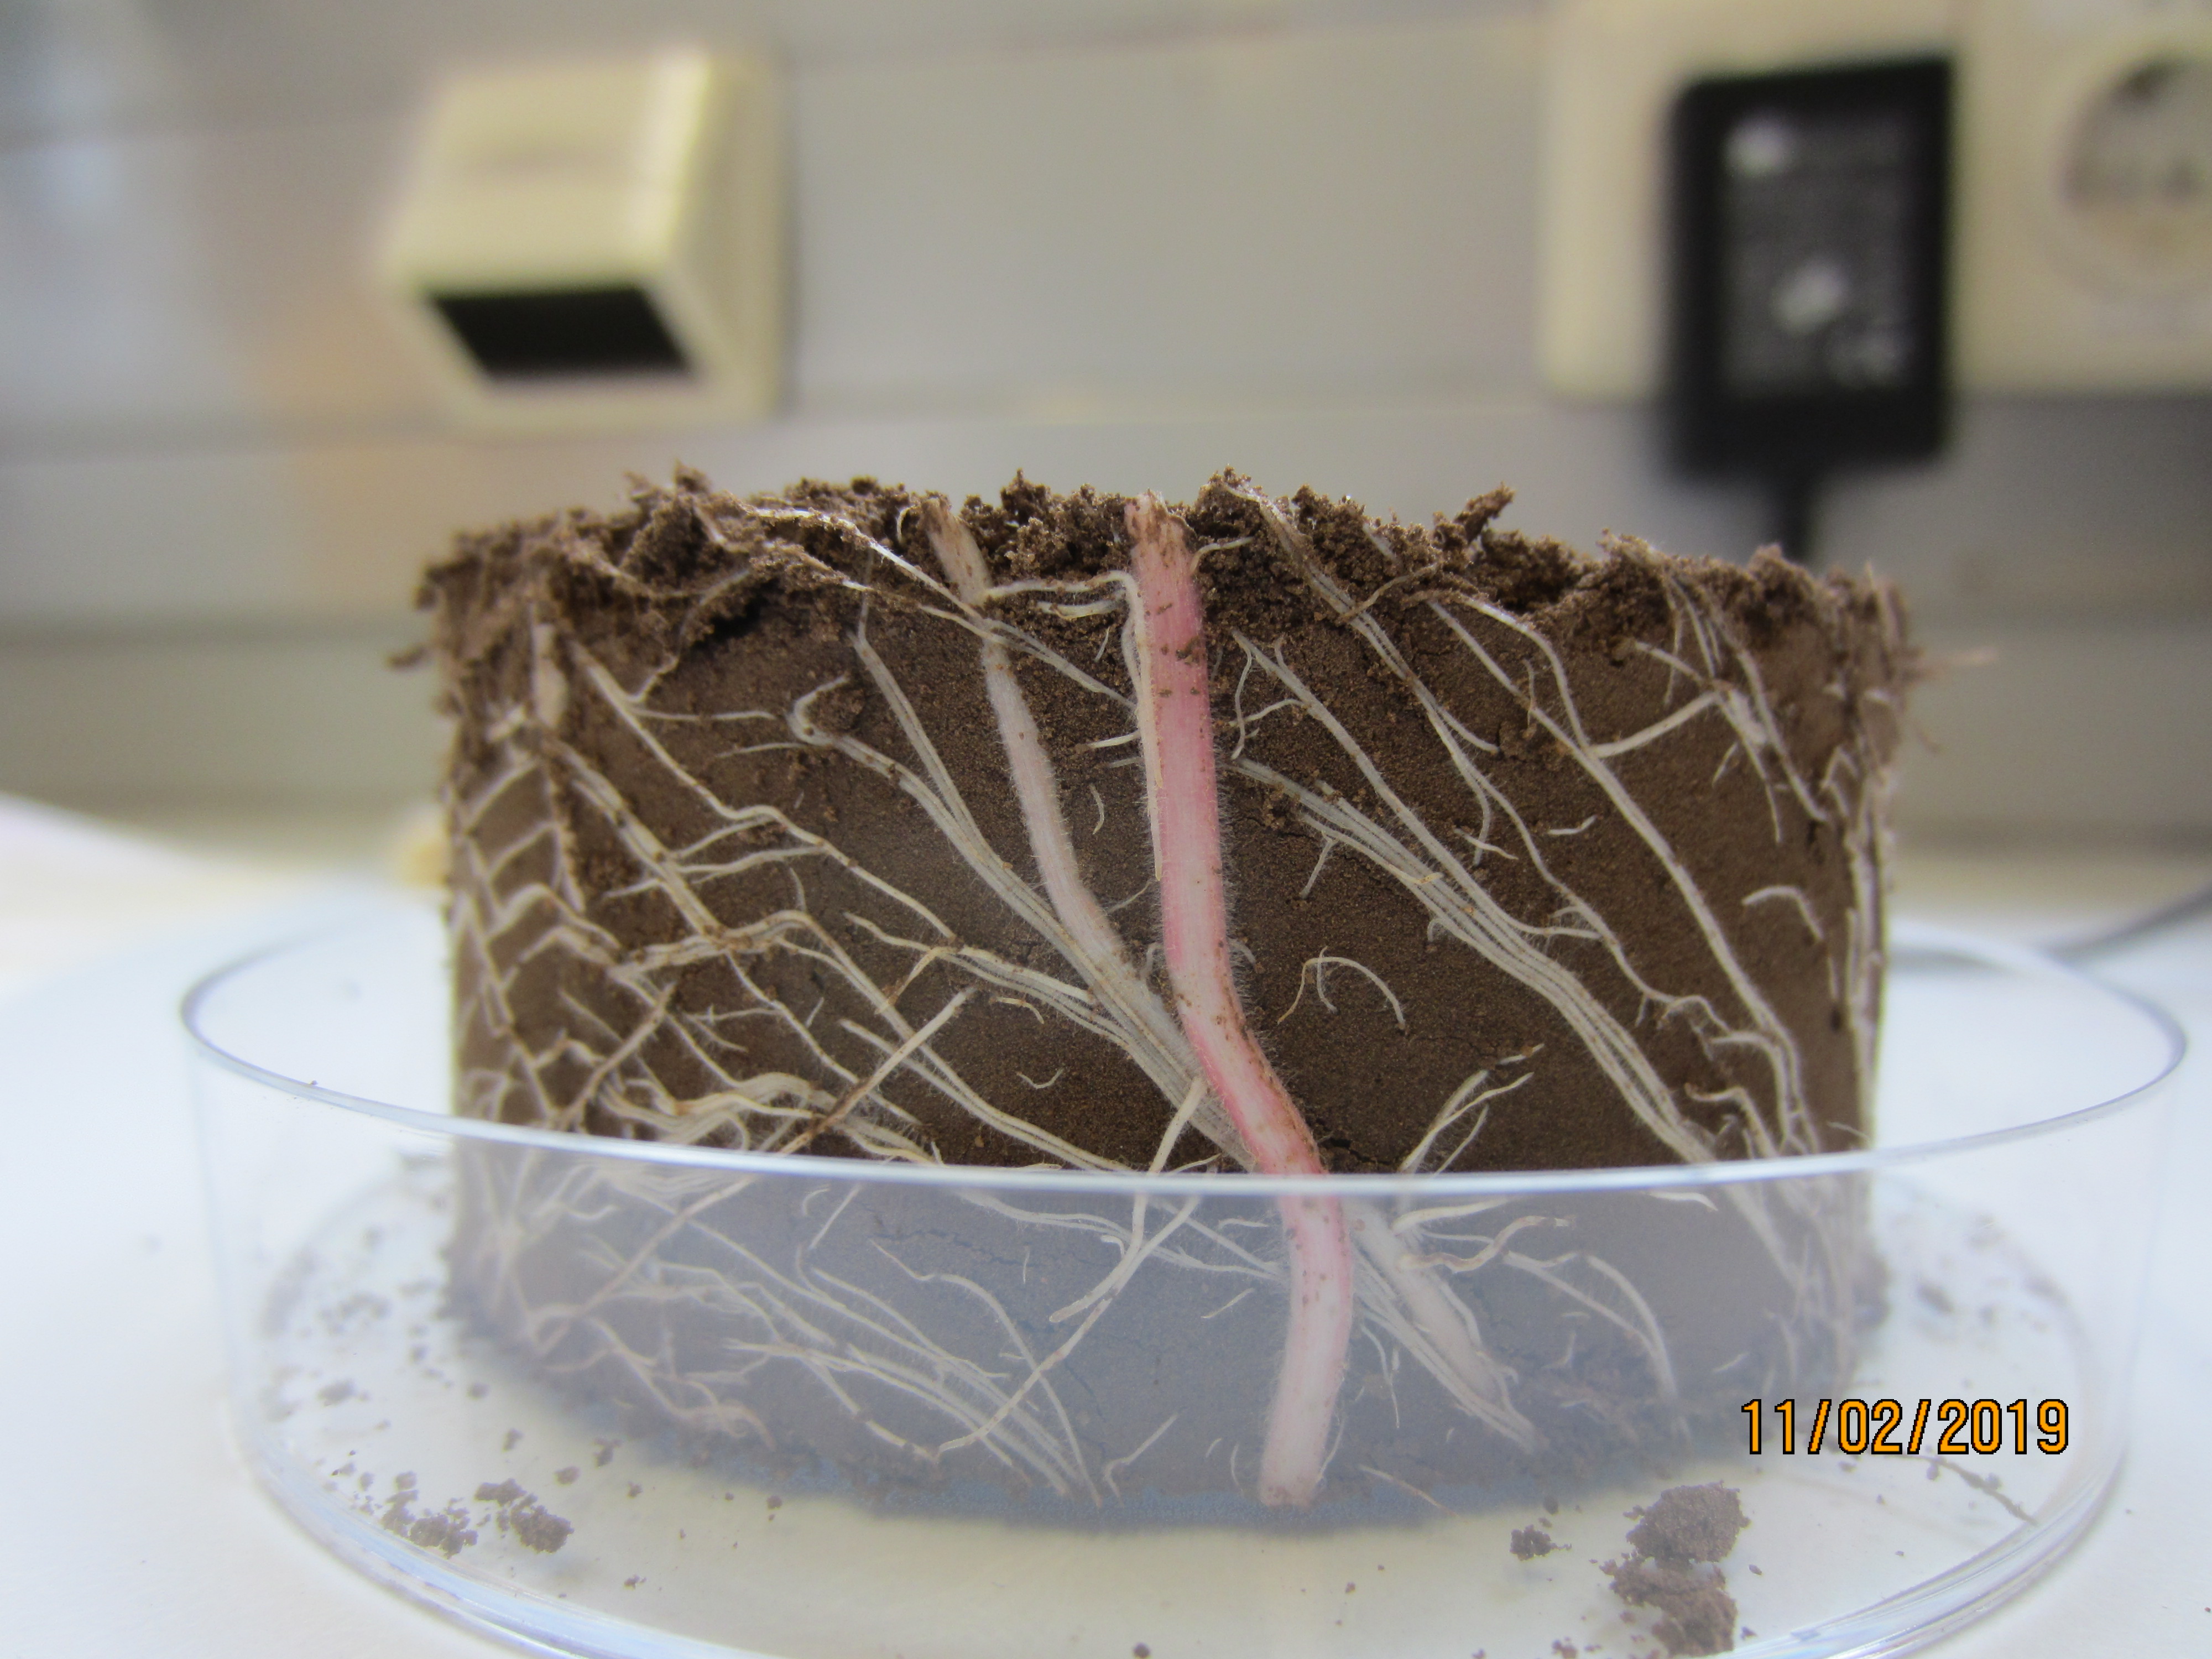 Maize root system in climate chamber experiment (Feb 2019)